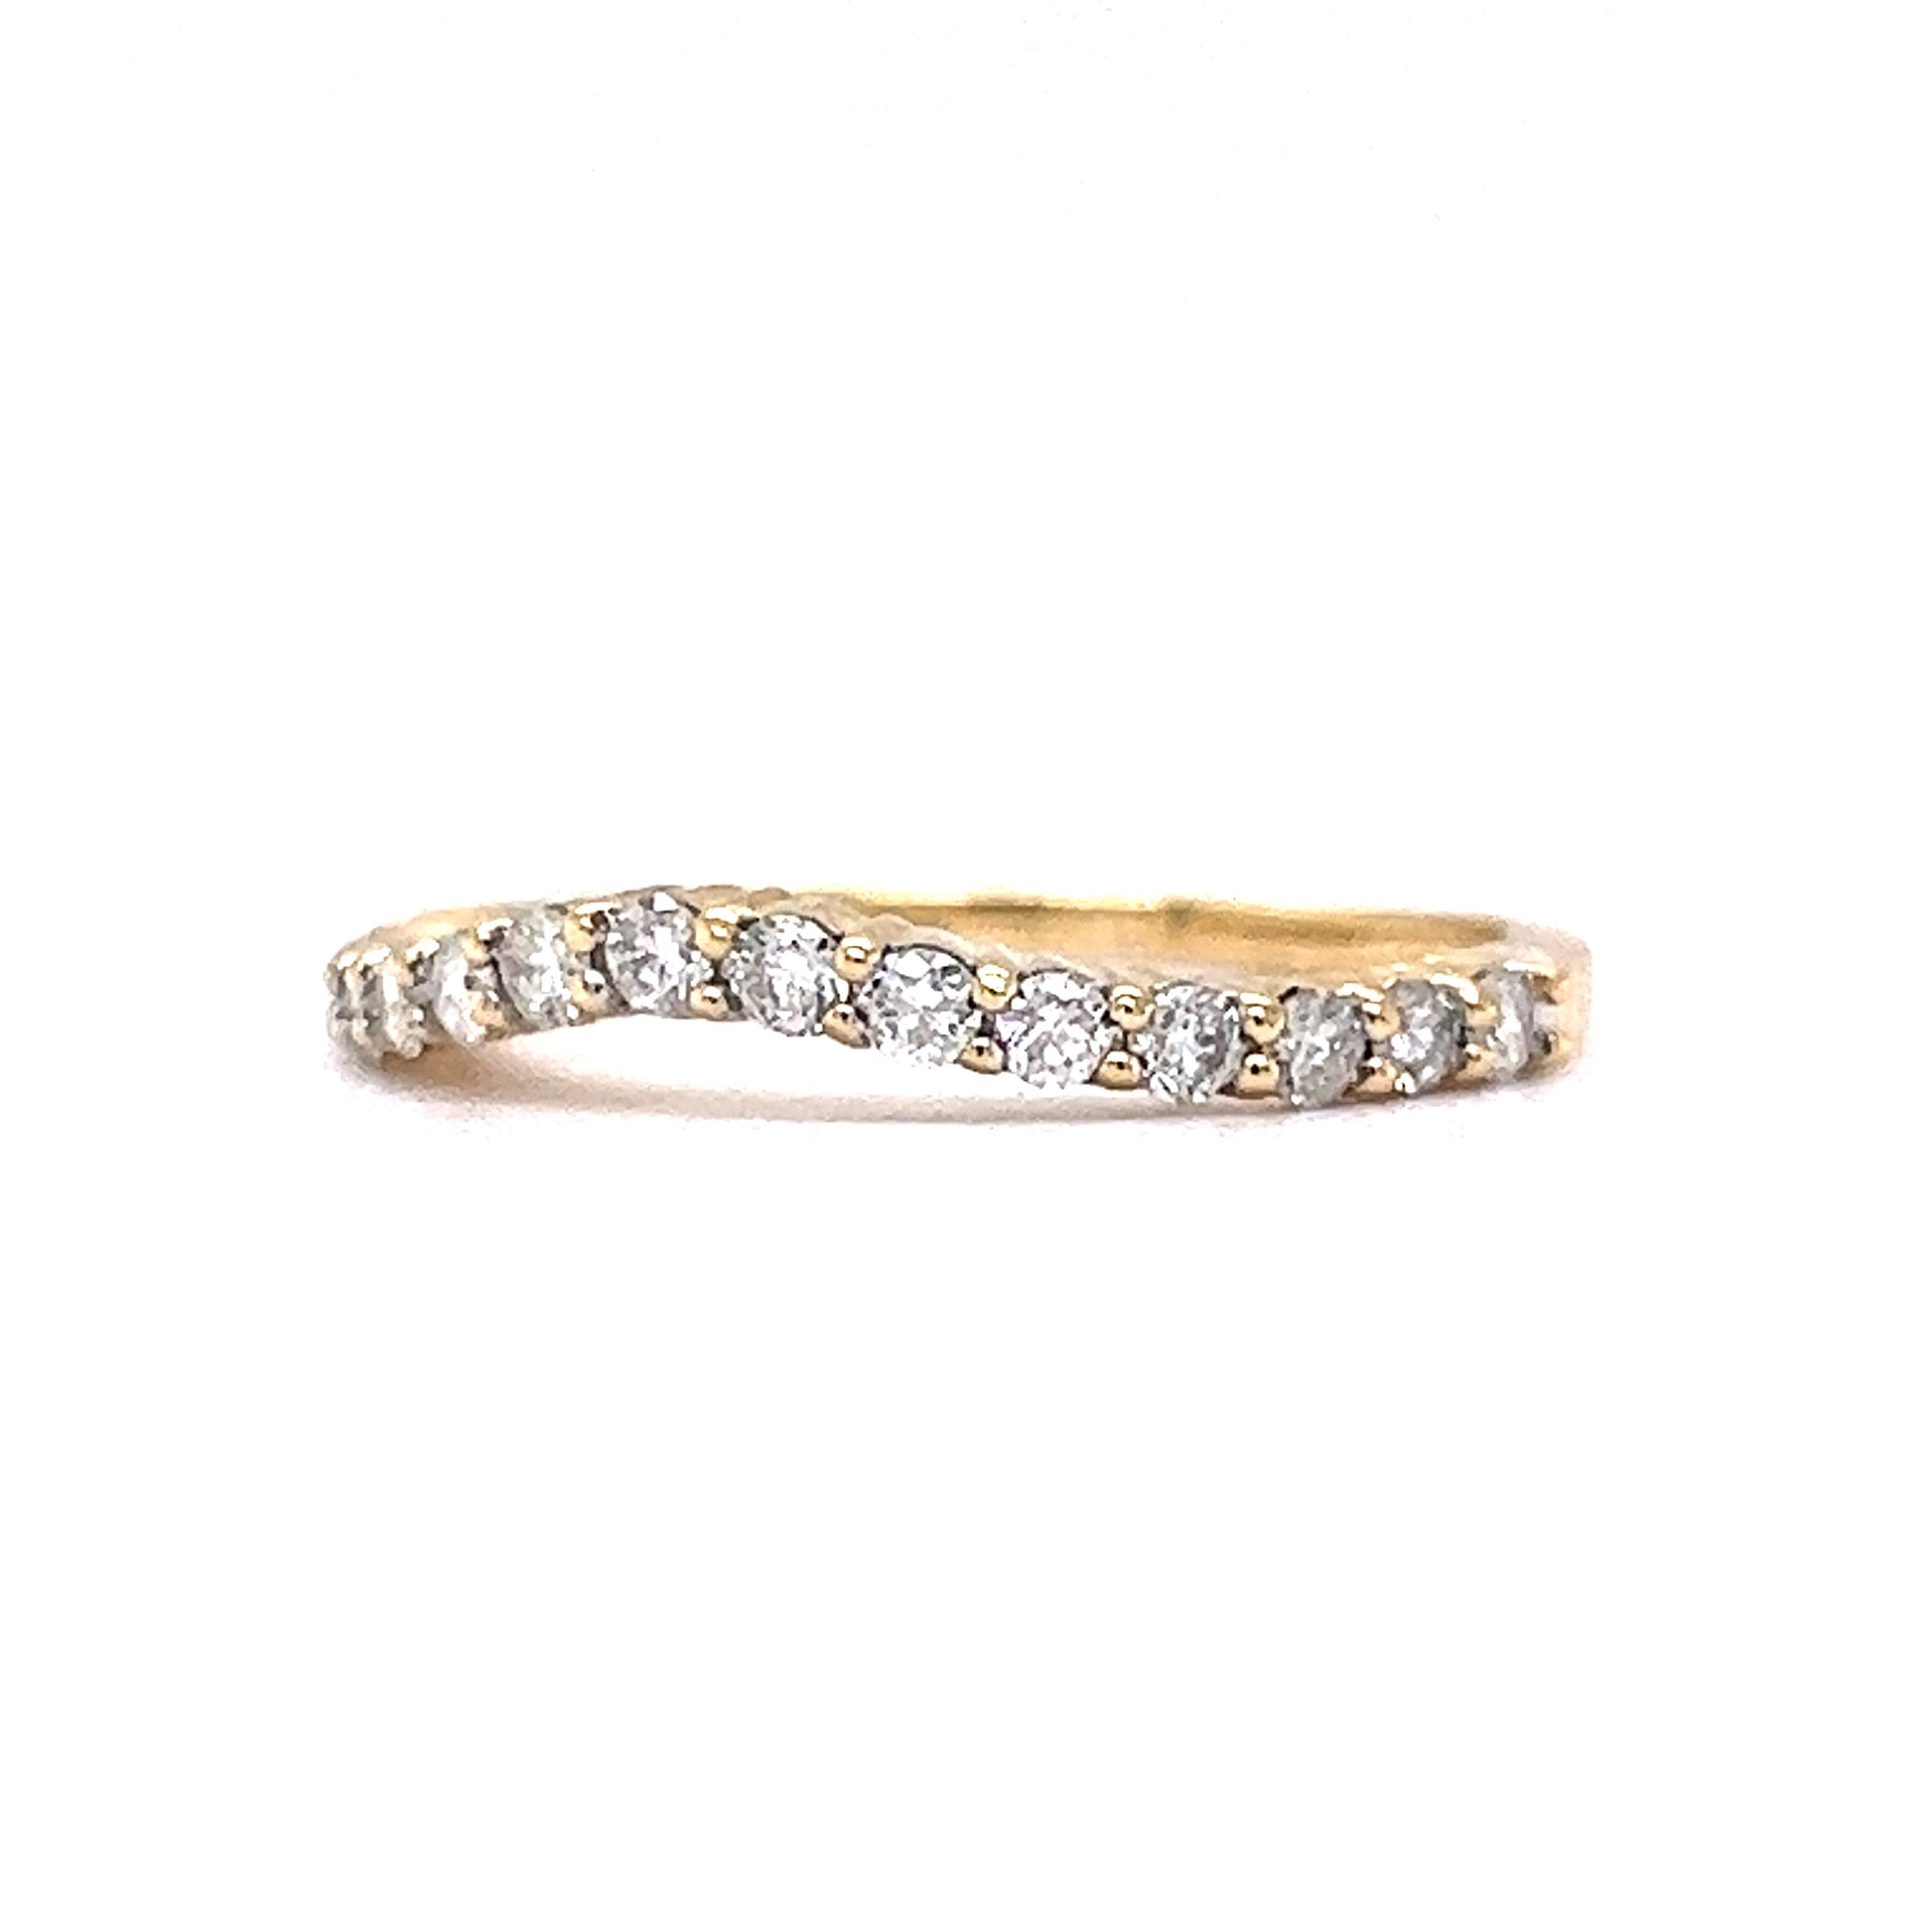 Round Curved Diamond Wedding Band in 14k Yellow GoldComposition: 14 Karat Yellow Gold Ring Size: 6 Total Diamond Weight: .375ct Total Gram Weight: 1.4 g